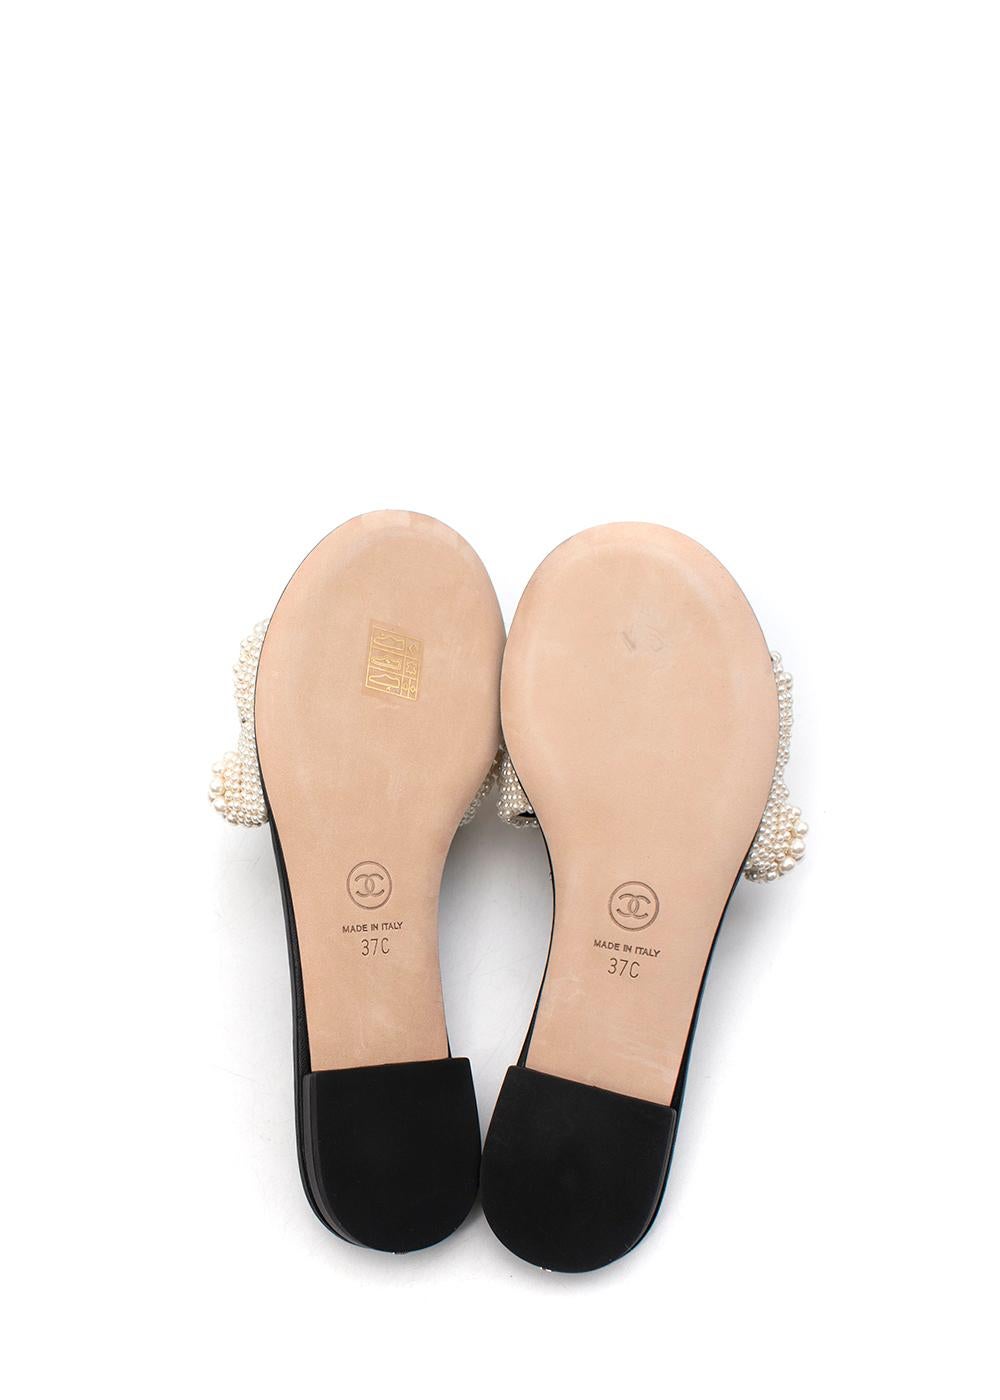 Chanel Faux-Pearl Embellished Sliders EU 37 For Sale 1